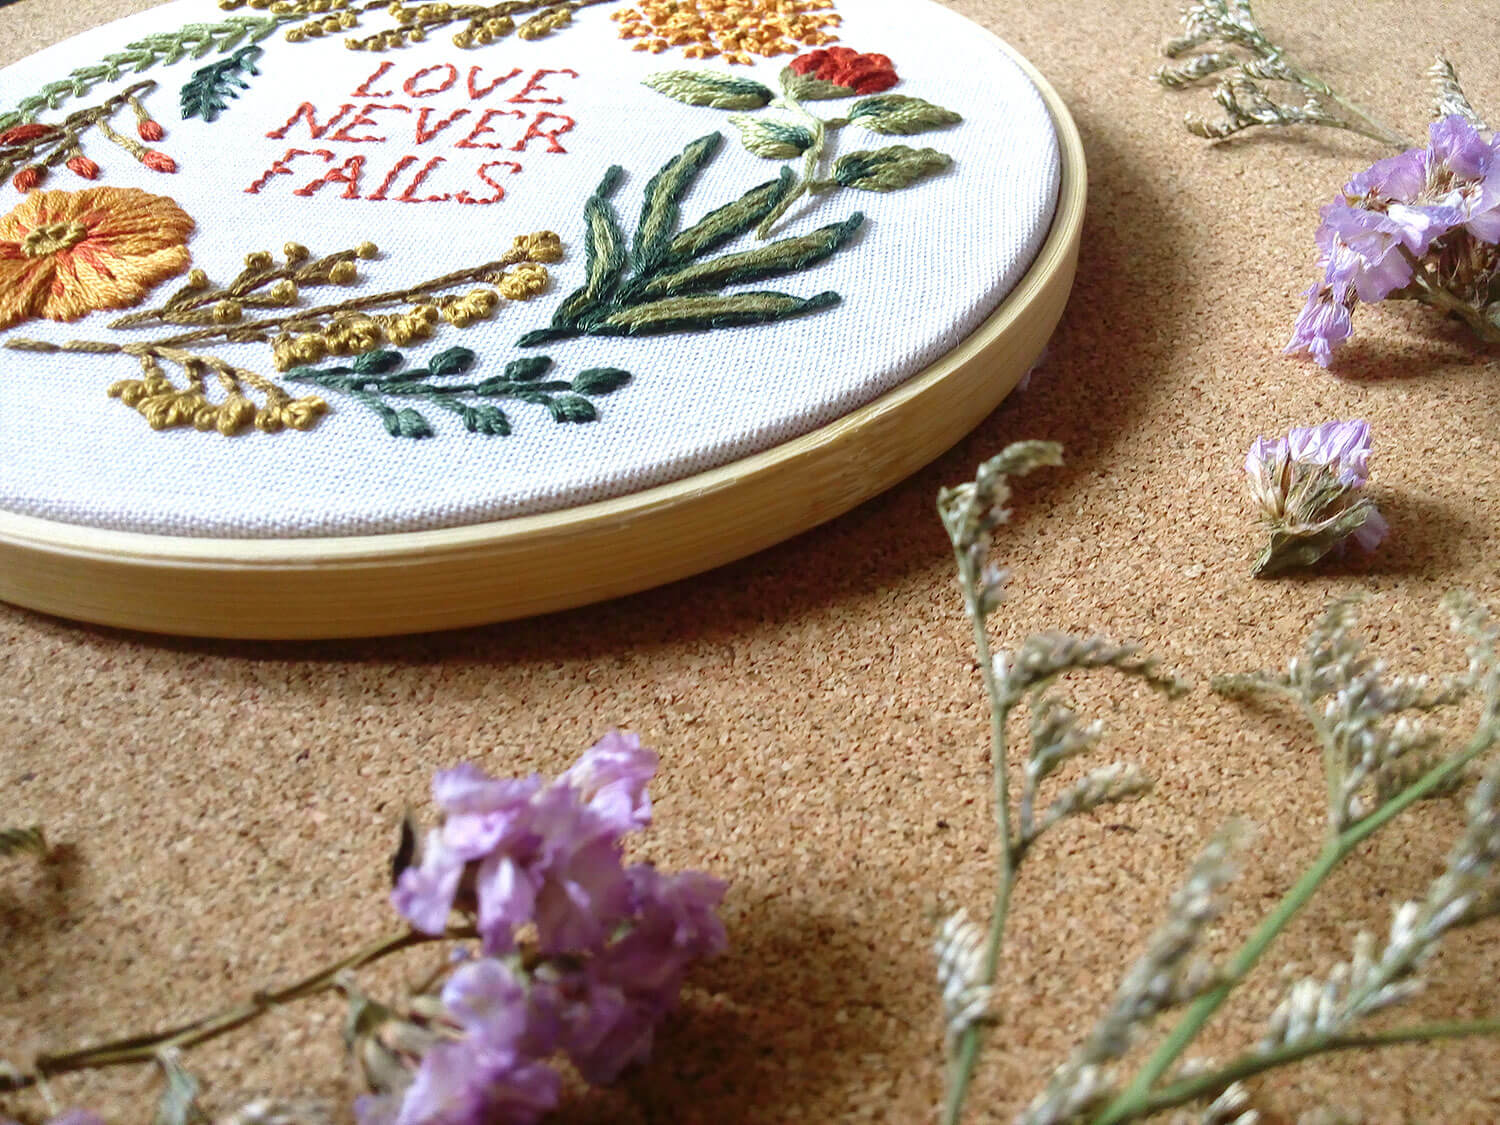 Flower Embroidery Pattern: Conjure Up Your Fantasy World